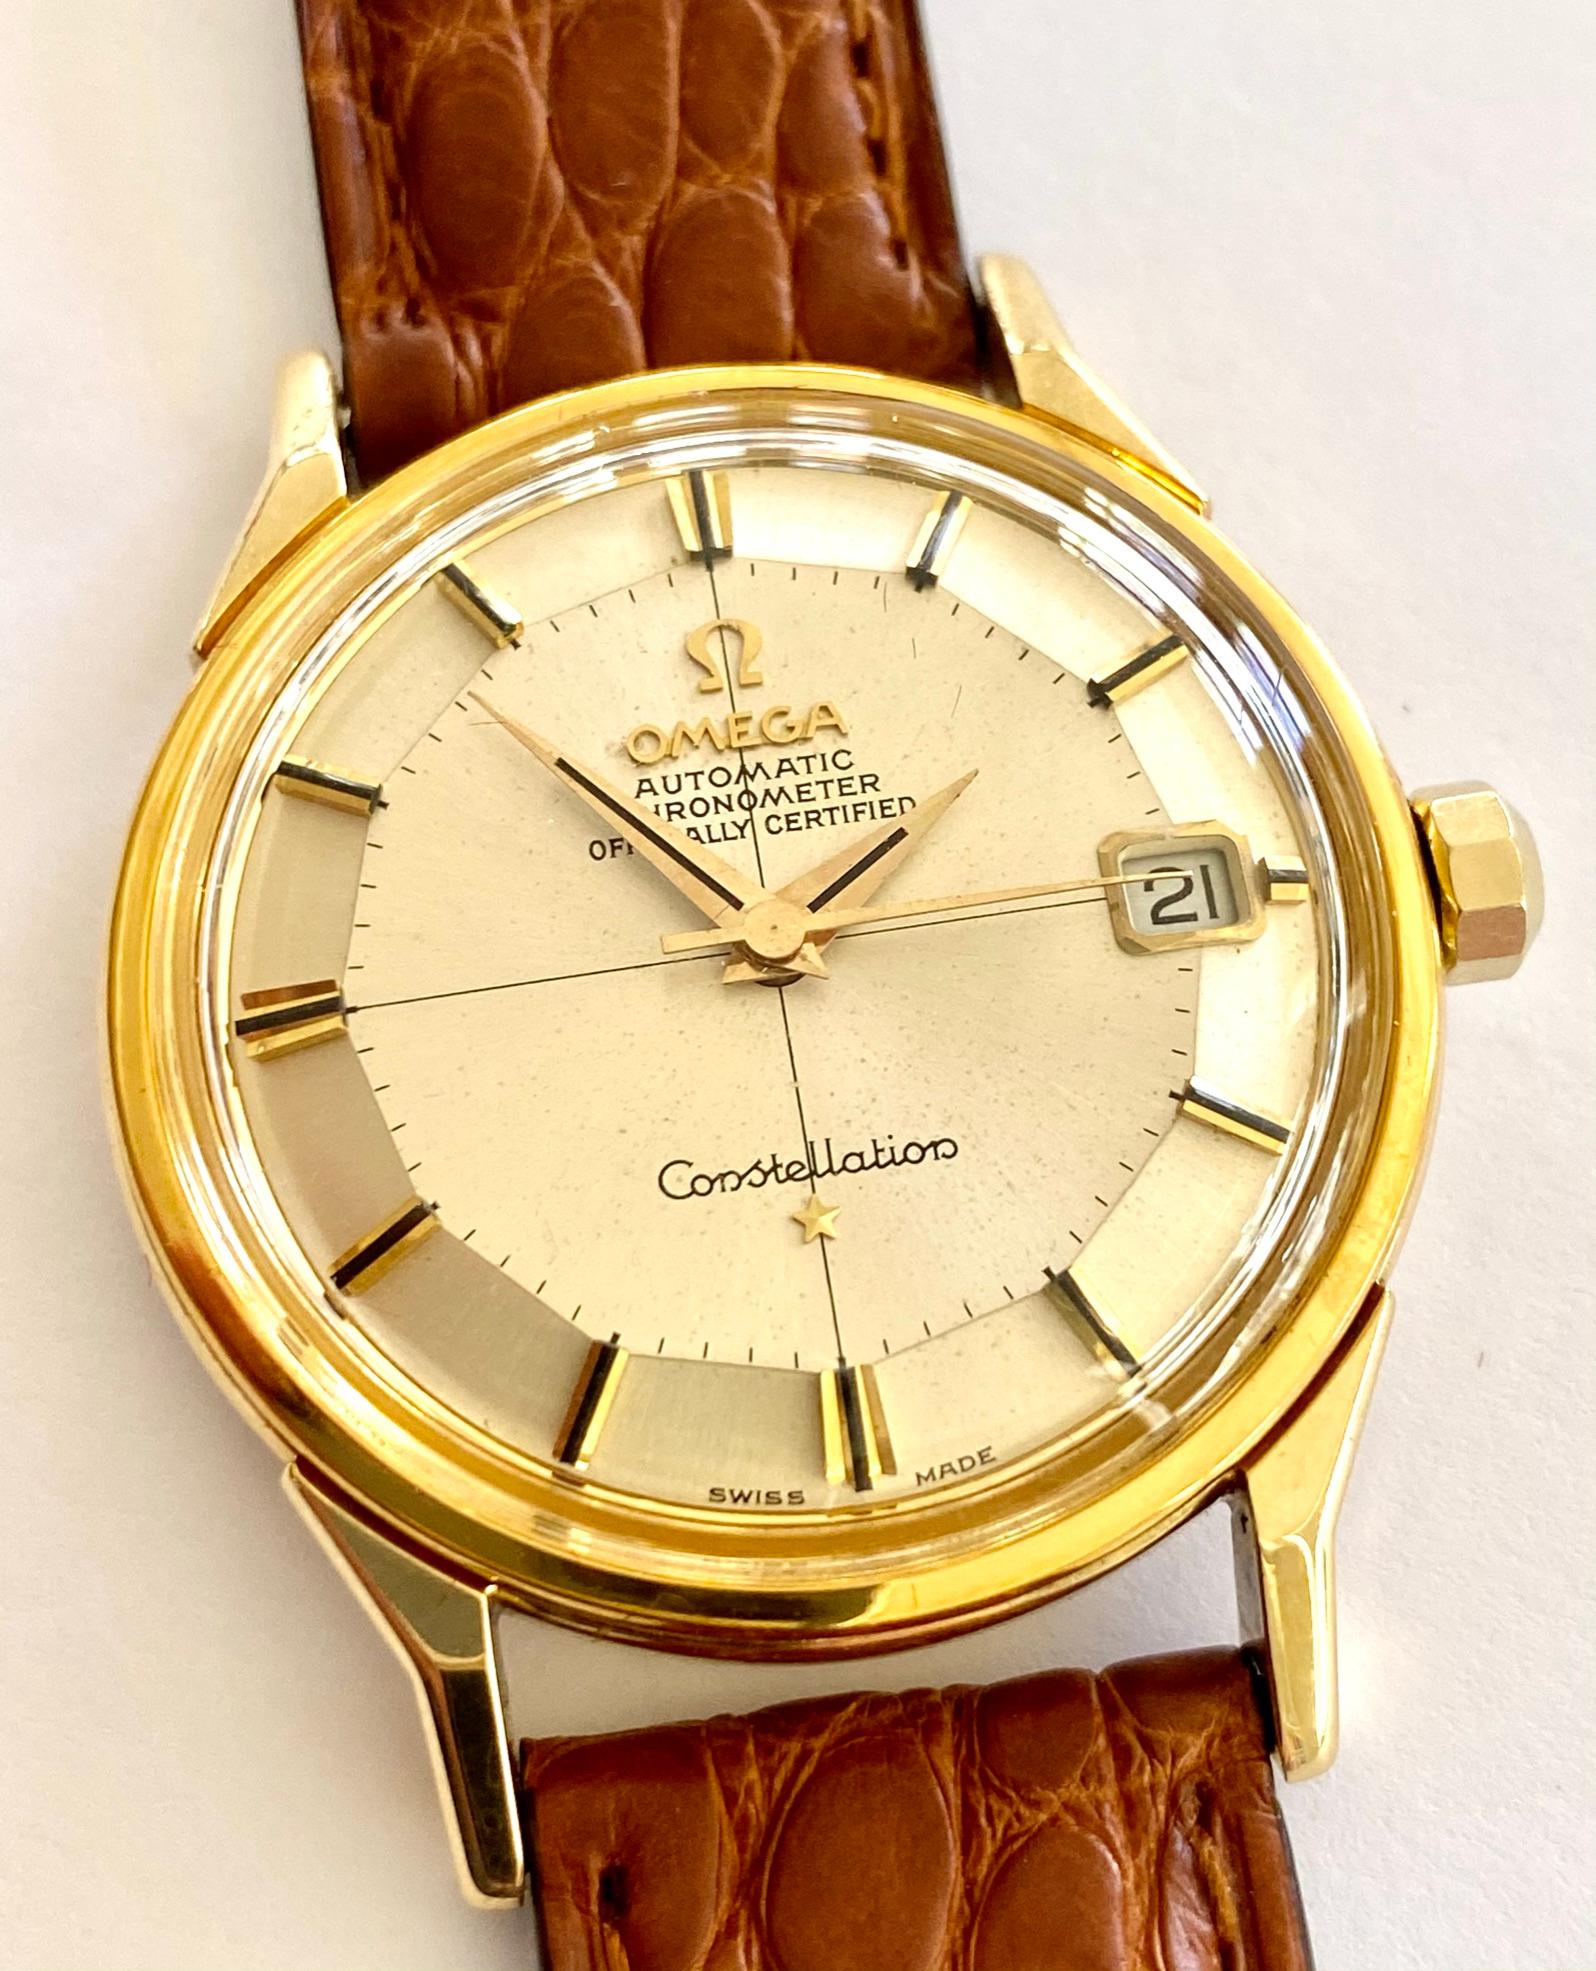 18K. yellow Gold Omega Constellation Watch with a  brown leather strap
model nr: BA 168.005  
Automatic chronometer calibre 561, with date, twelve-sided silvered dial, inner minute circle with strokes, polished and riveted gold hour markers with a